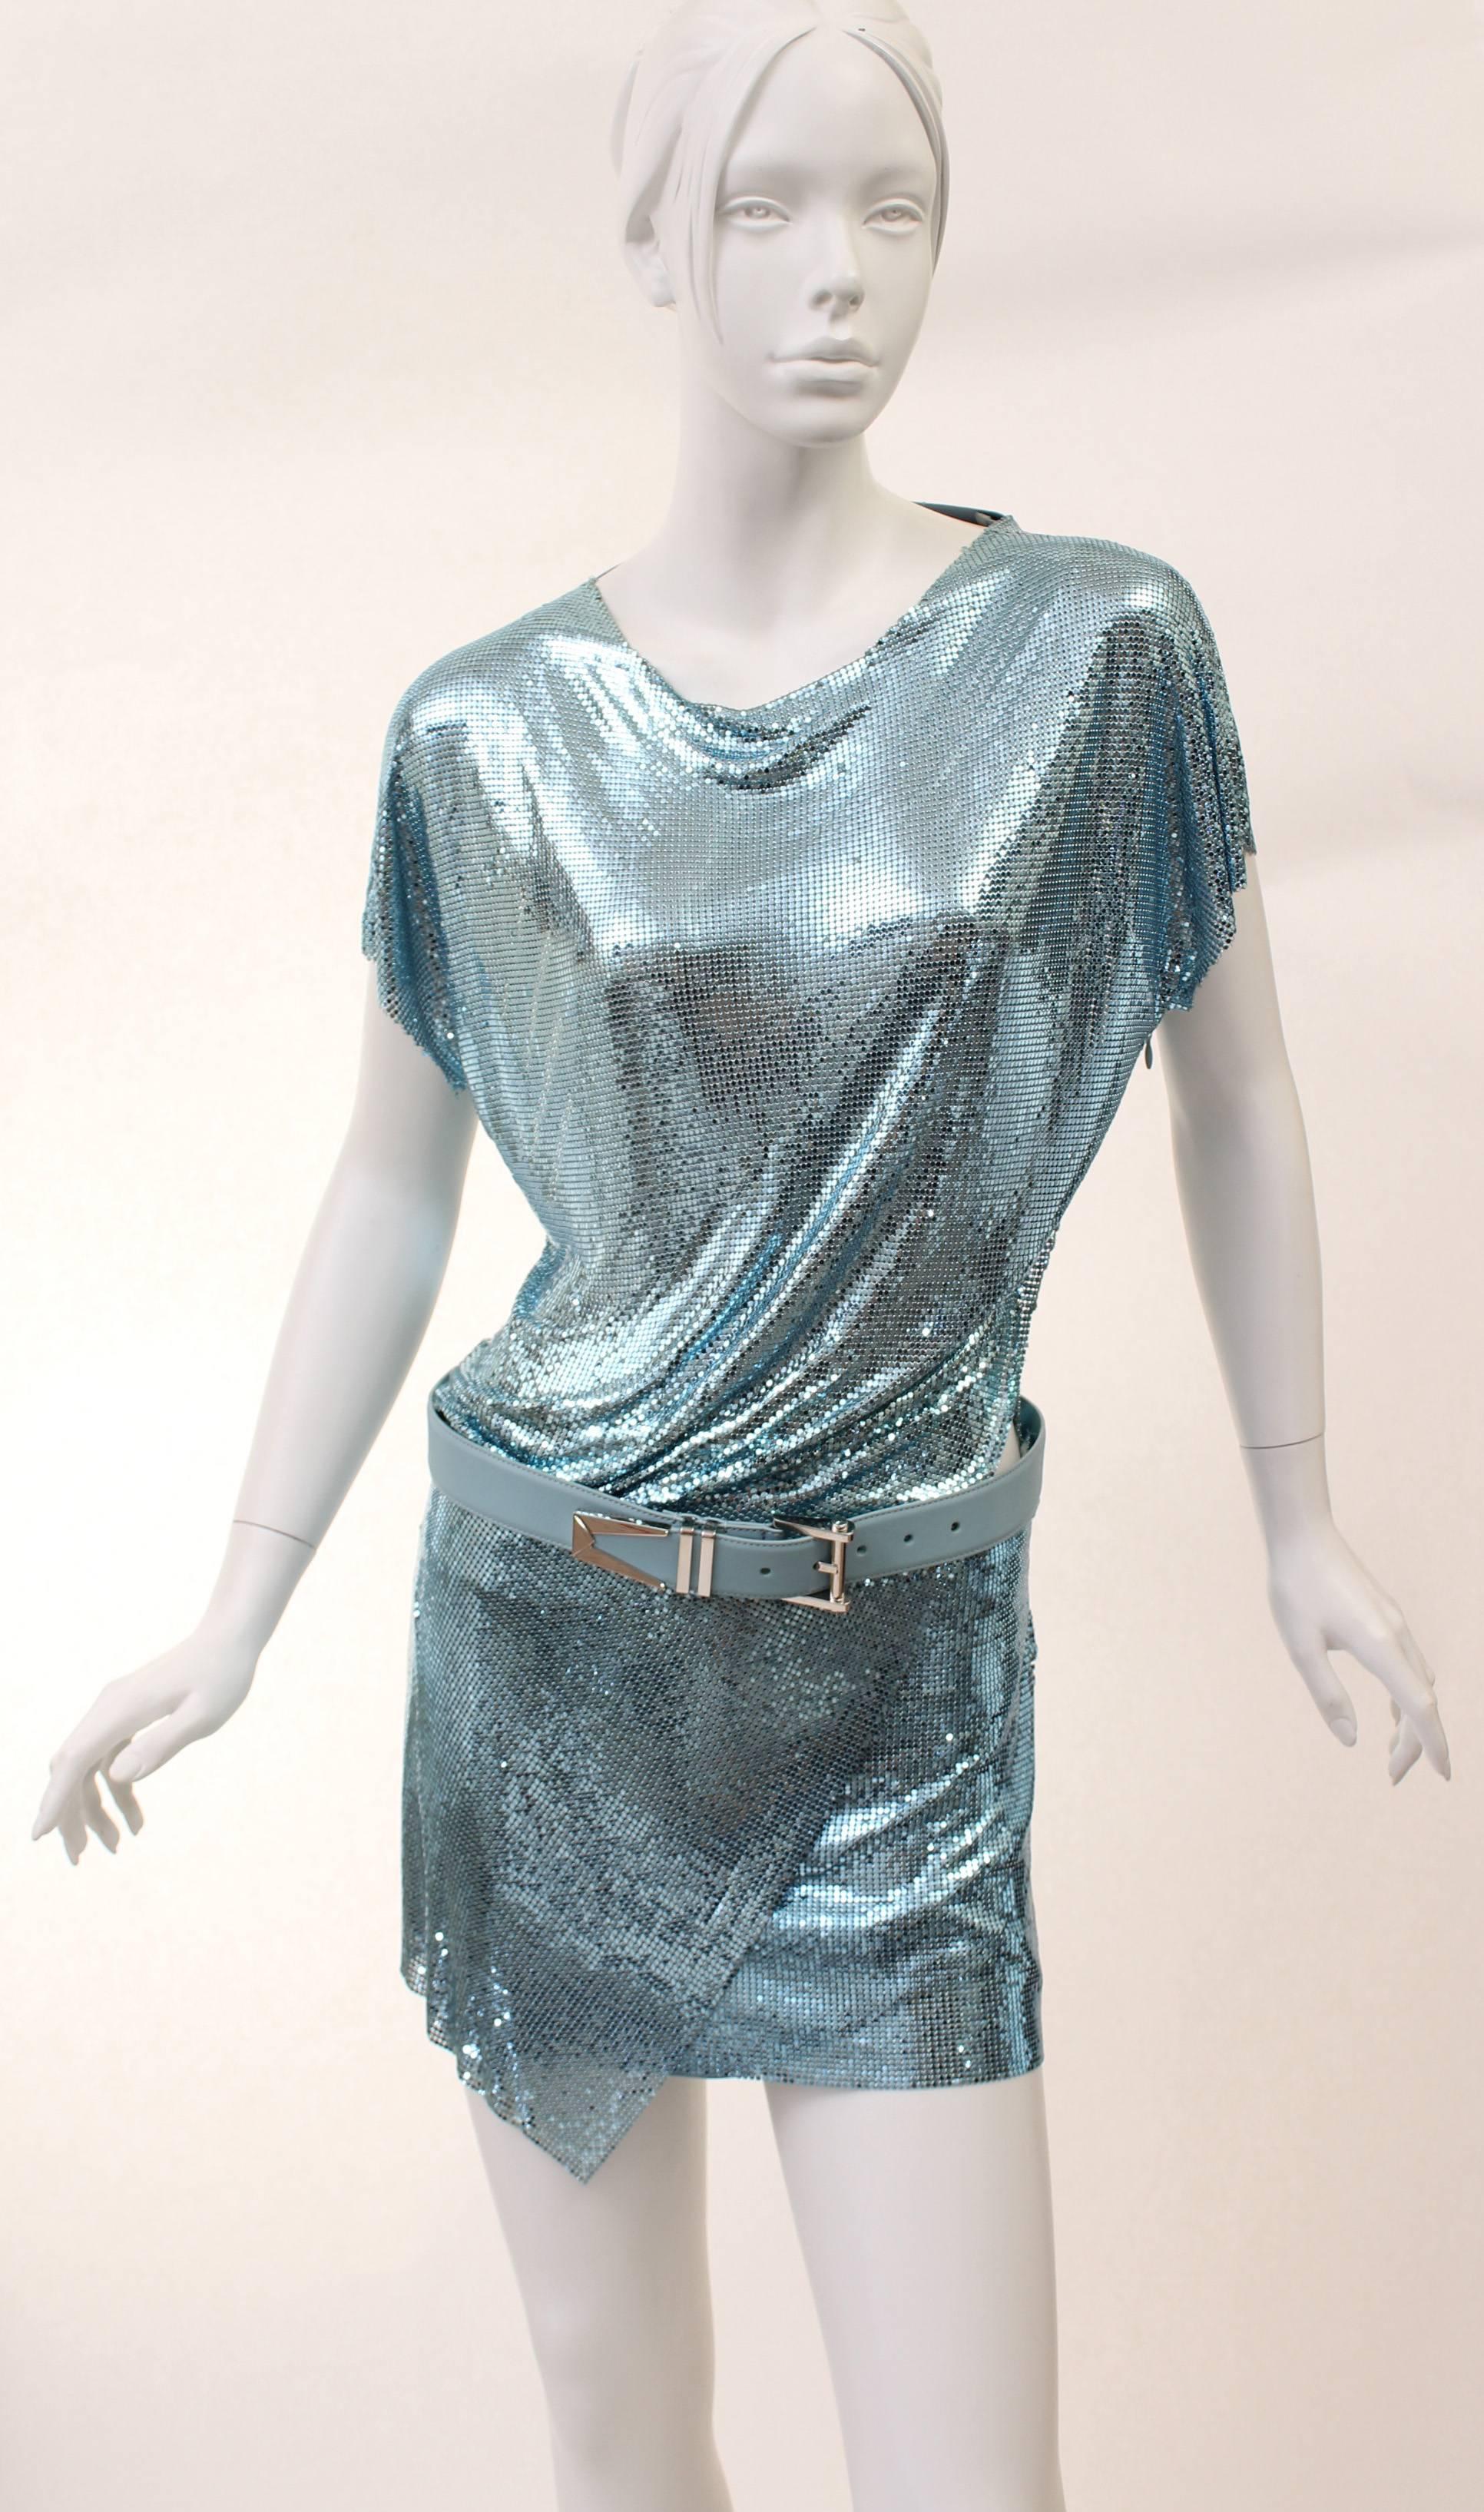  Versace 

Metal mesh mini dress in blue.

Comes with blue leather belt.

Made in Italy

IT Size: 38 - US 4

Brand New, with tags

